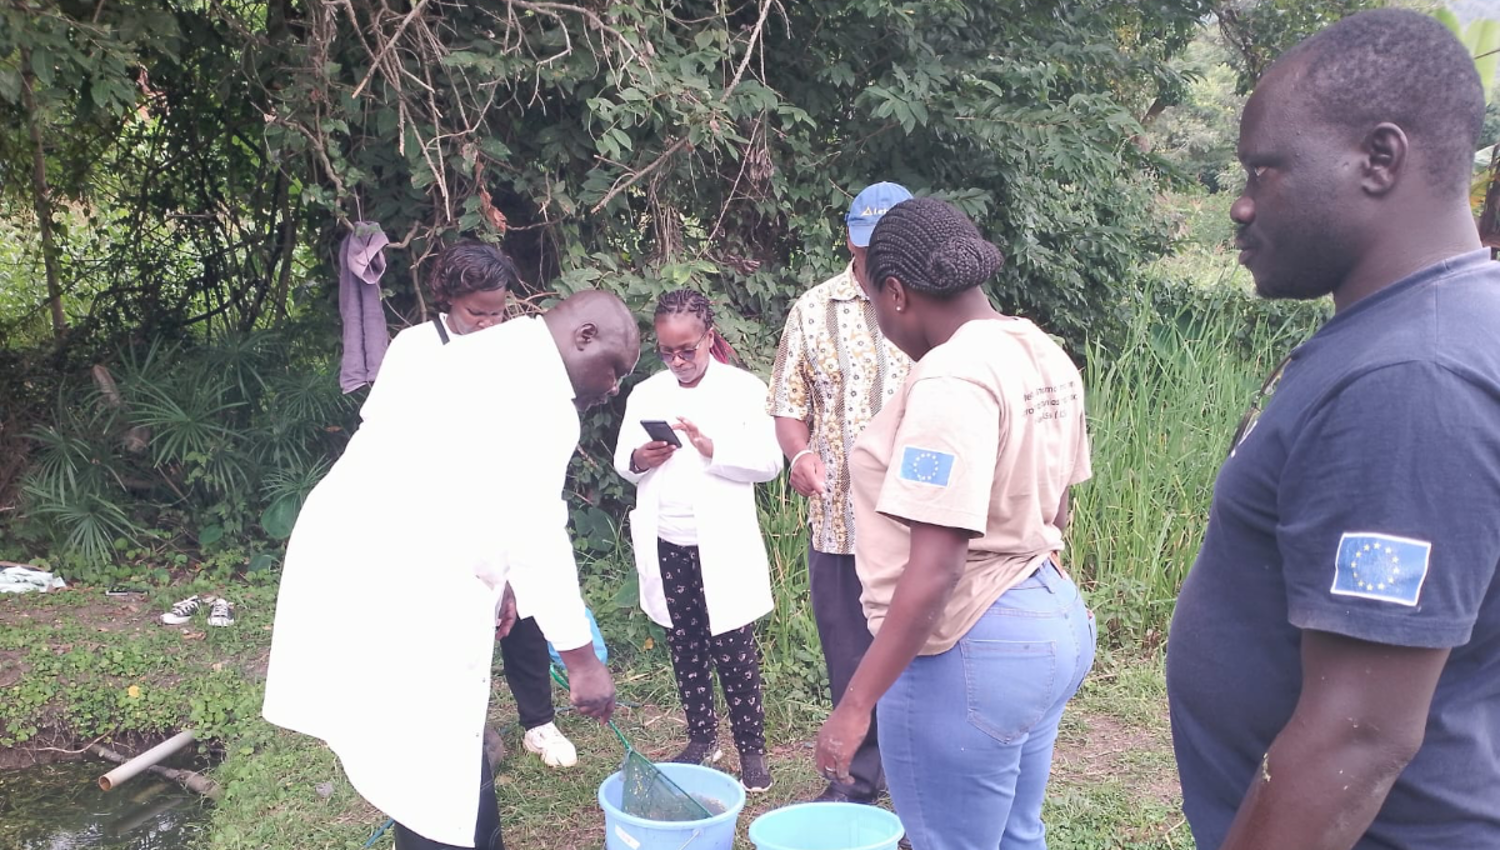 Mercy Matuma Hamisi collecting data on aquatic animal health with her fellow student researchers at the University of Nairobi in Kenya. Photo by Cidee khaseke and Finnan Ageng'o, WorldFish.